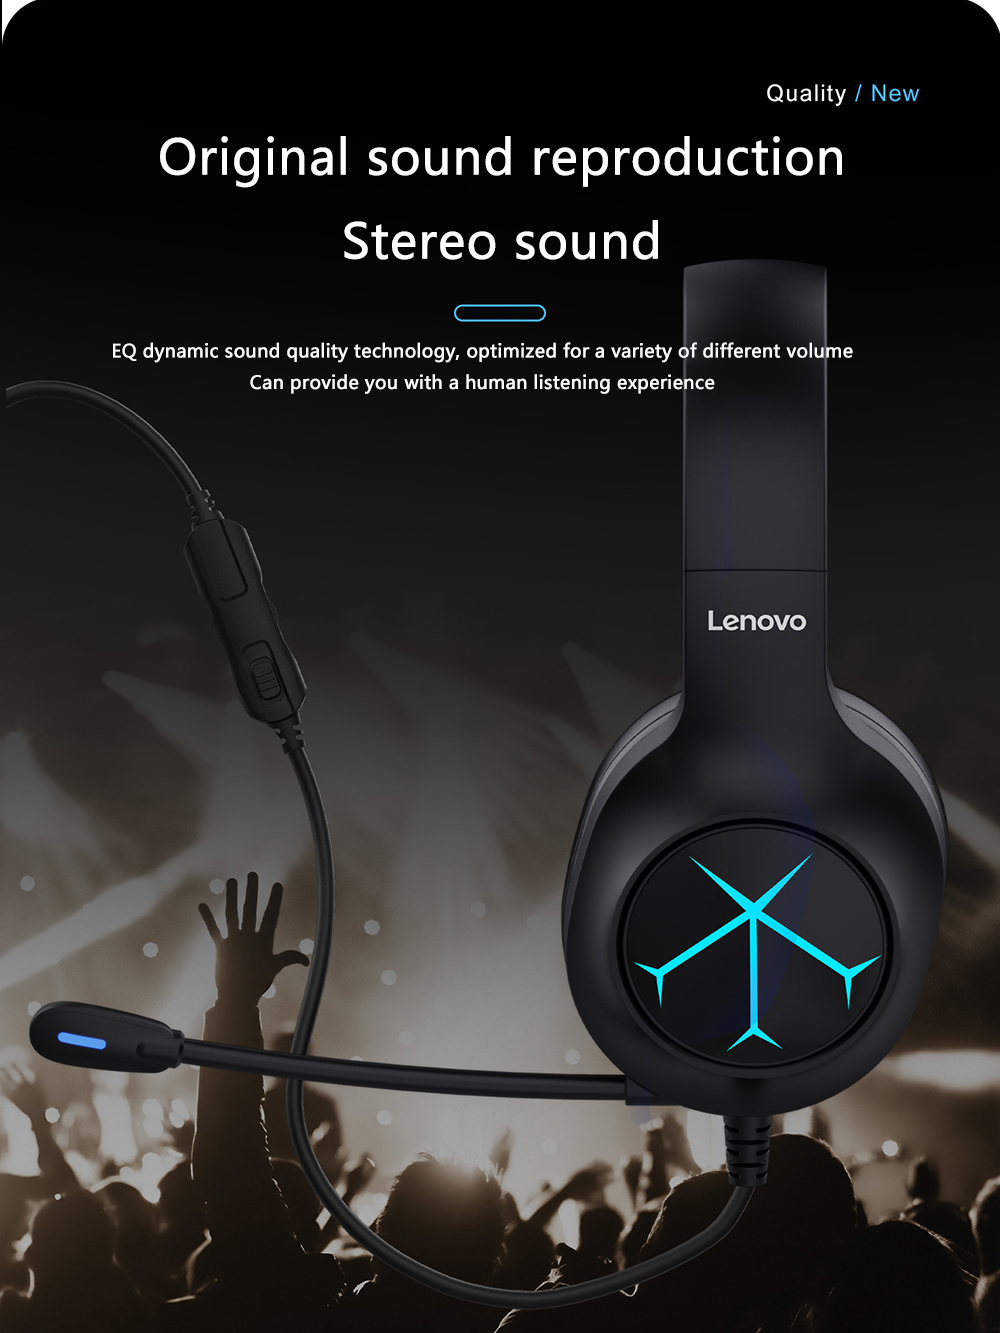 Lenovo-G60-Wired-Headset-71-Stereo-Blue-Light-Over-Ear-Gaming-Headphone-with-Mic-Noise-Canceling-USB-1896835-5